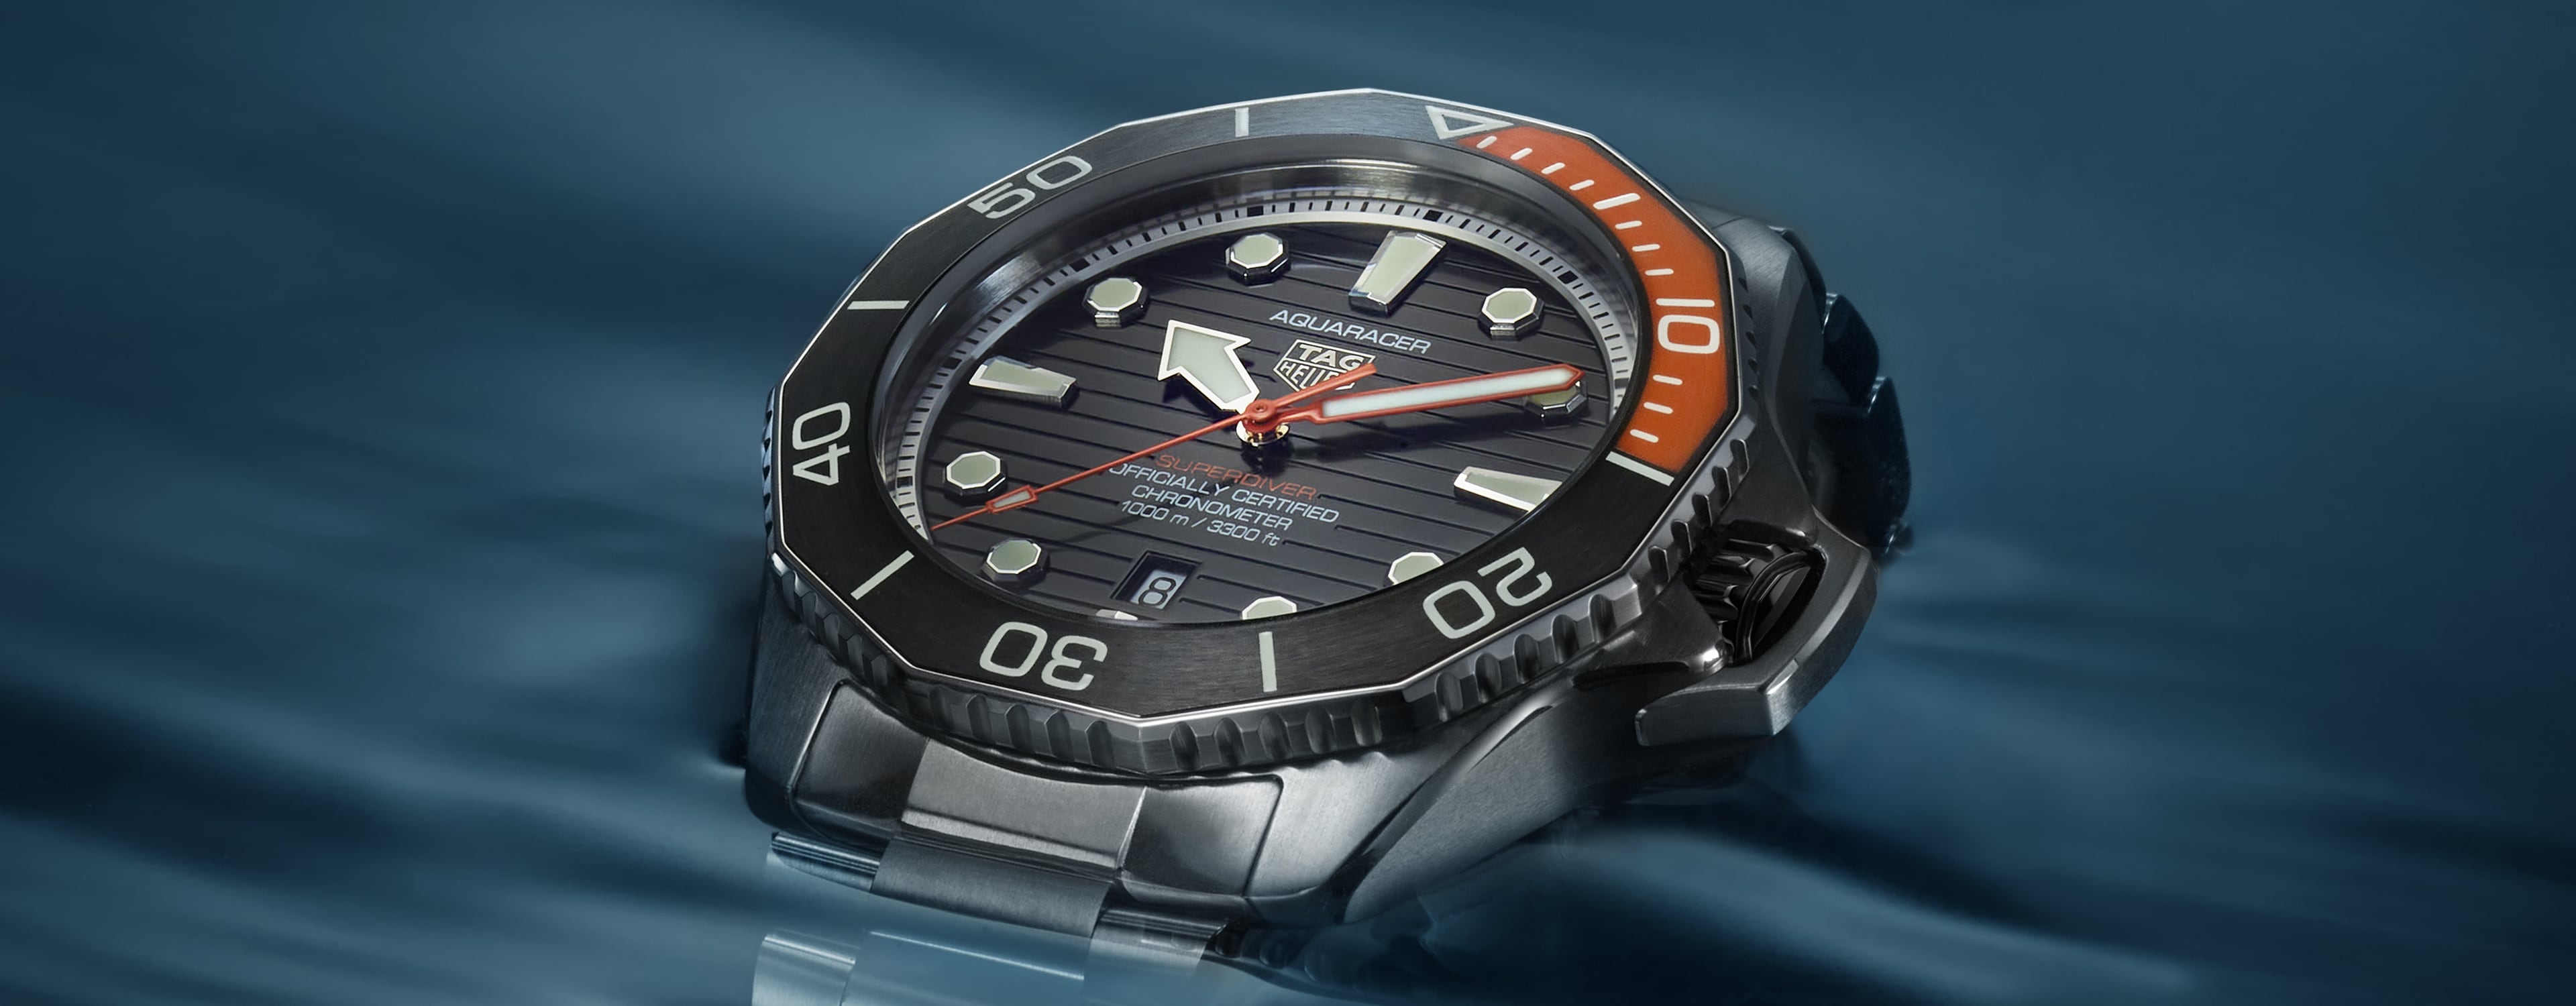 Collection Aquaracer